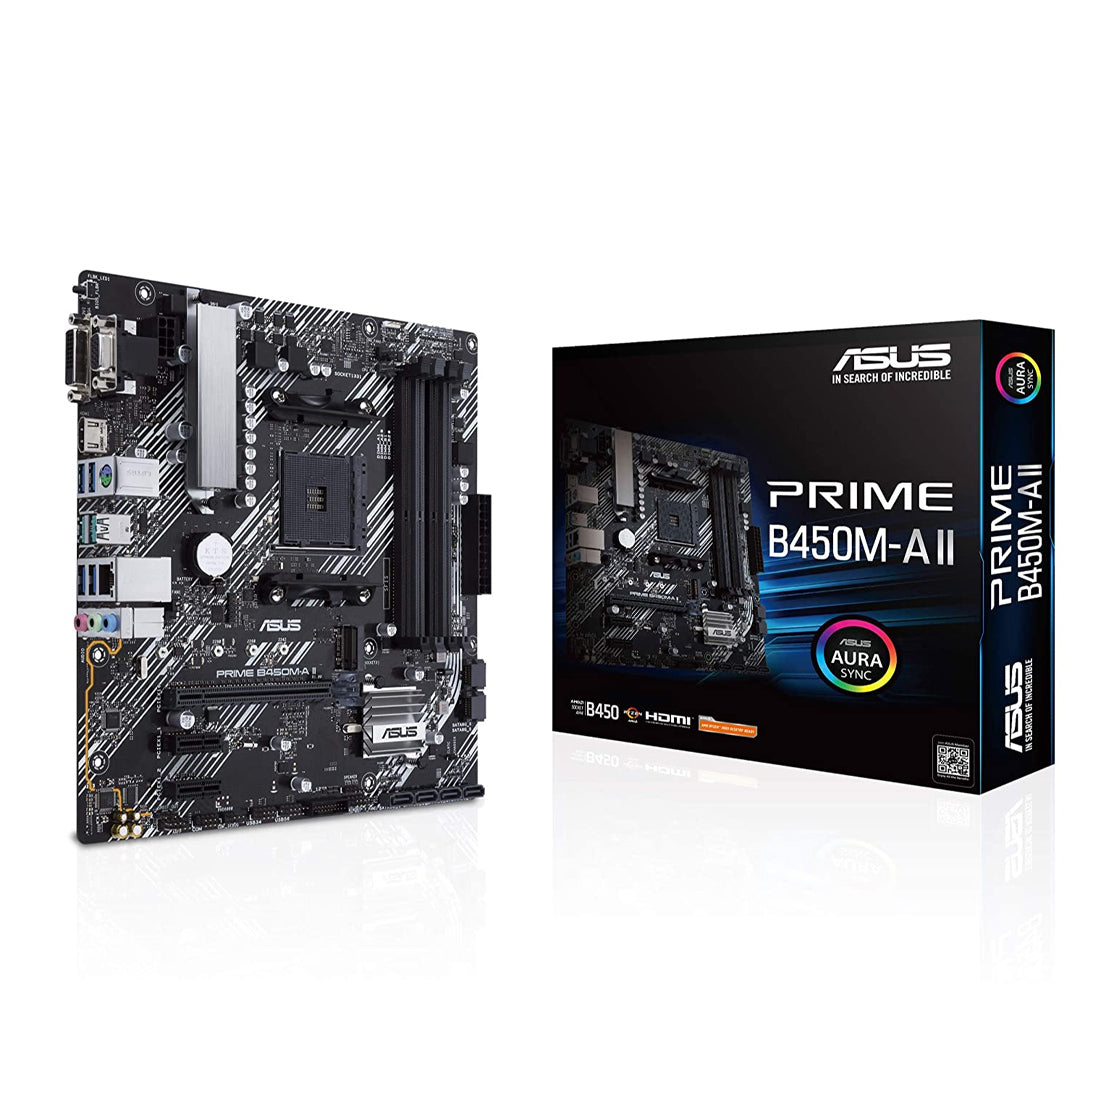 ASUS Prime B450M-A II AMD AM4 Micro-ATX Motherboard with USB 3.2 Type A M.2 and BIOS Flashback